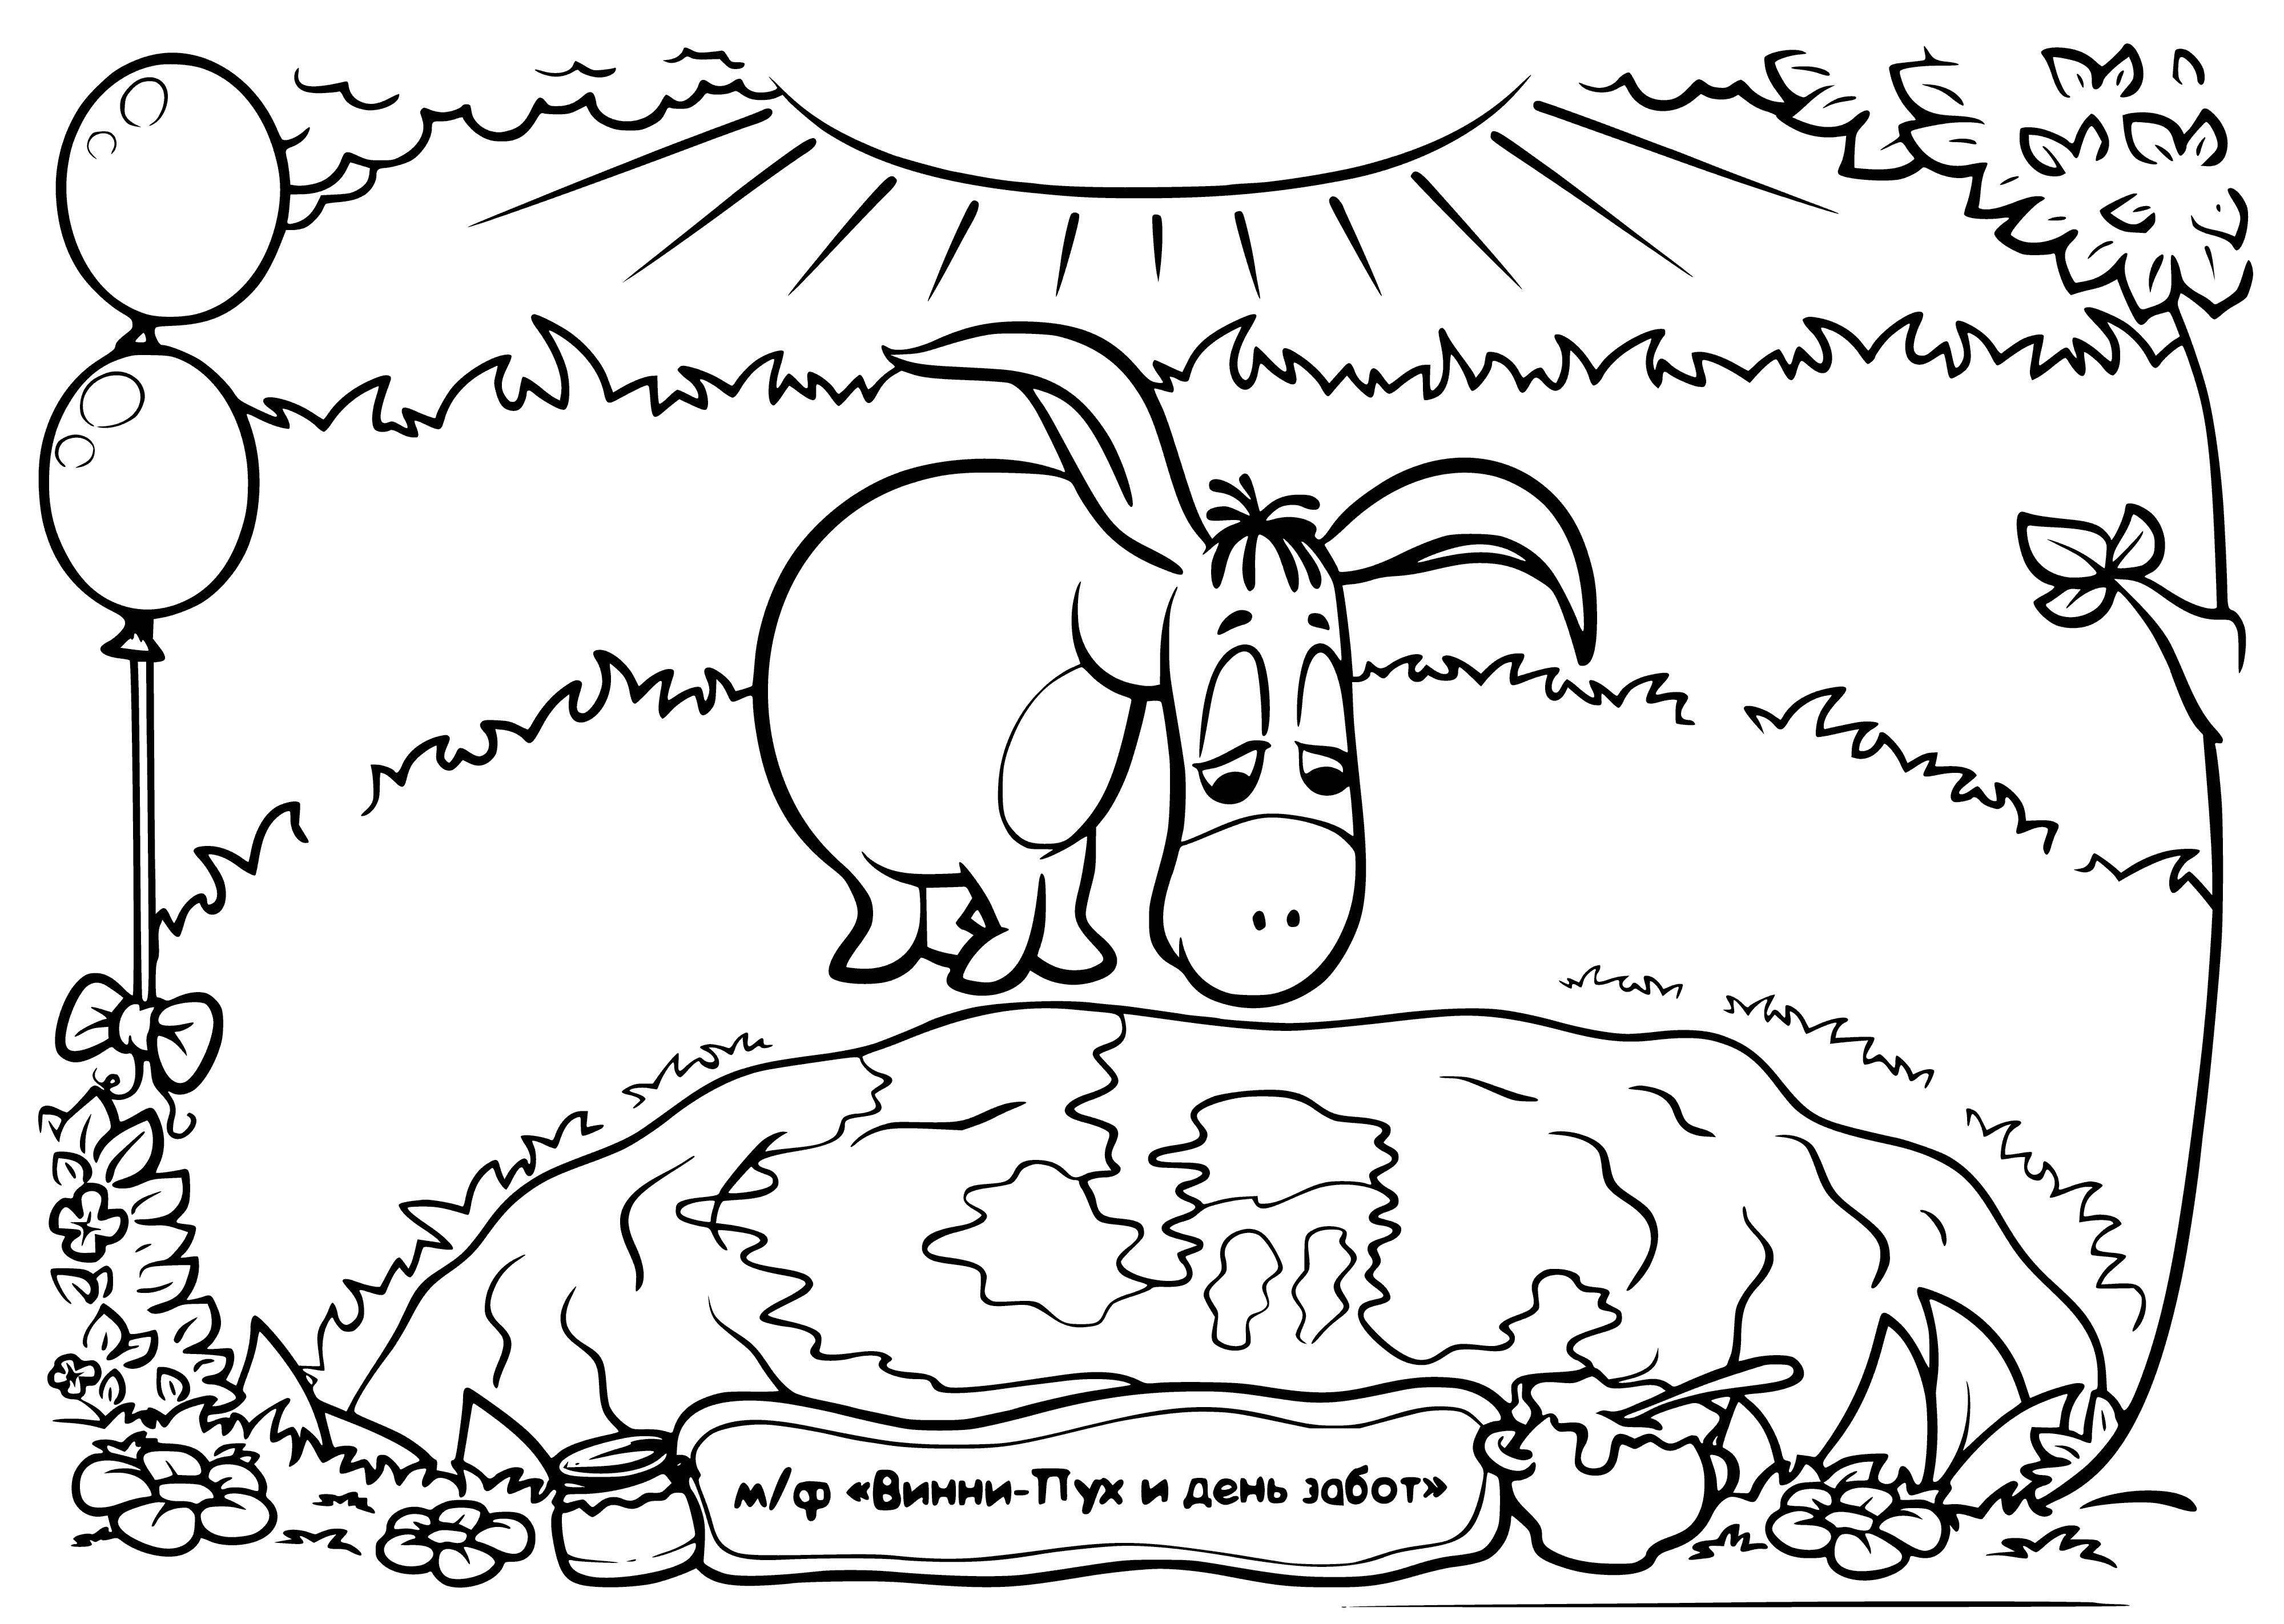 coloring page: A donkey stands sad with head down & ears drooping. He has big black spots on his back.